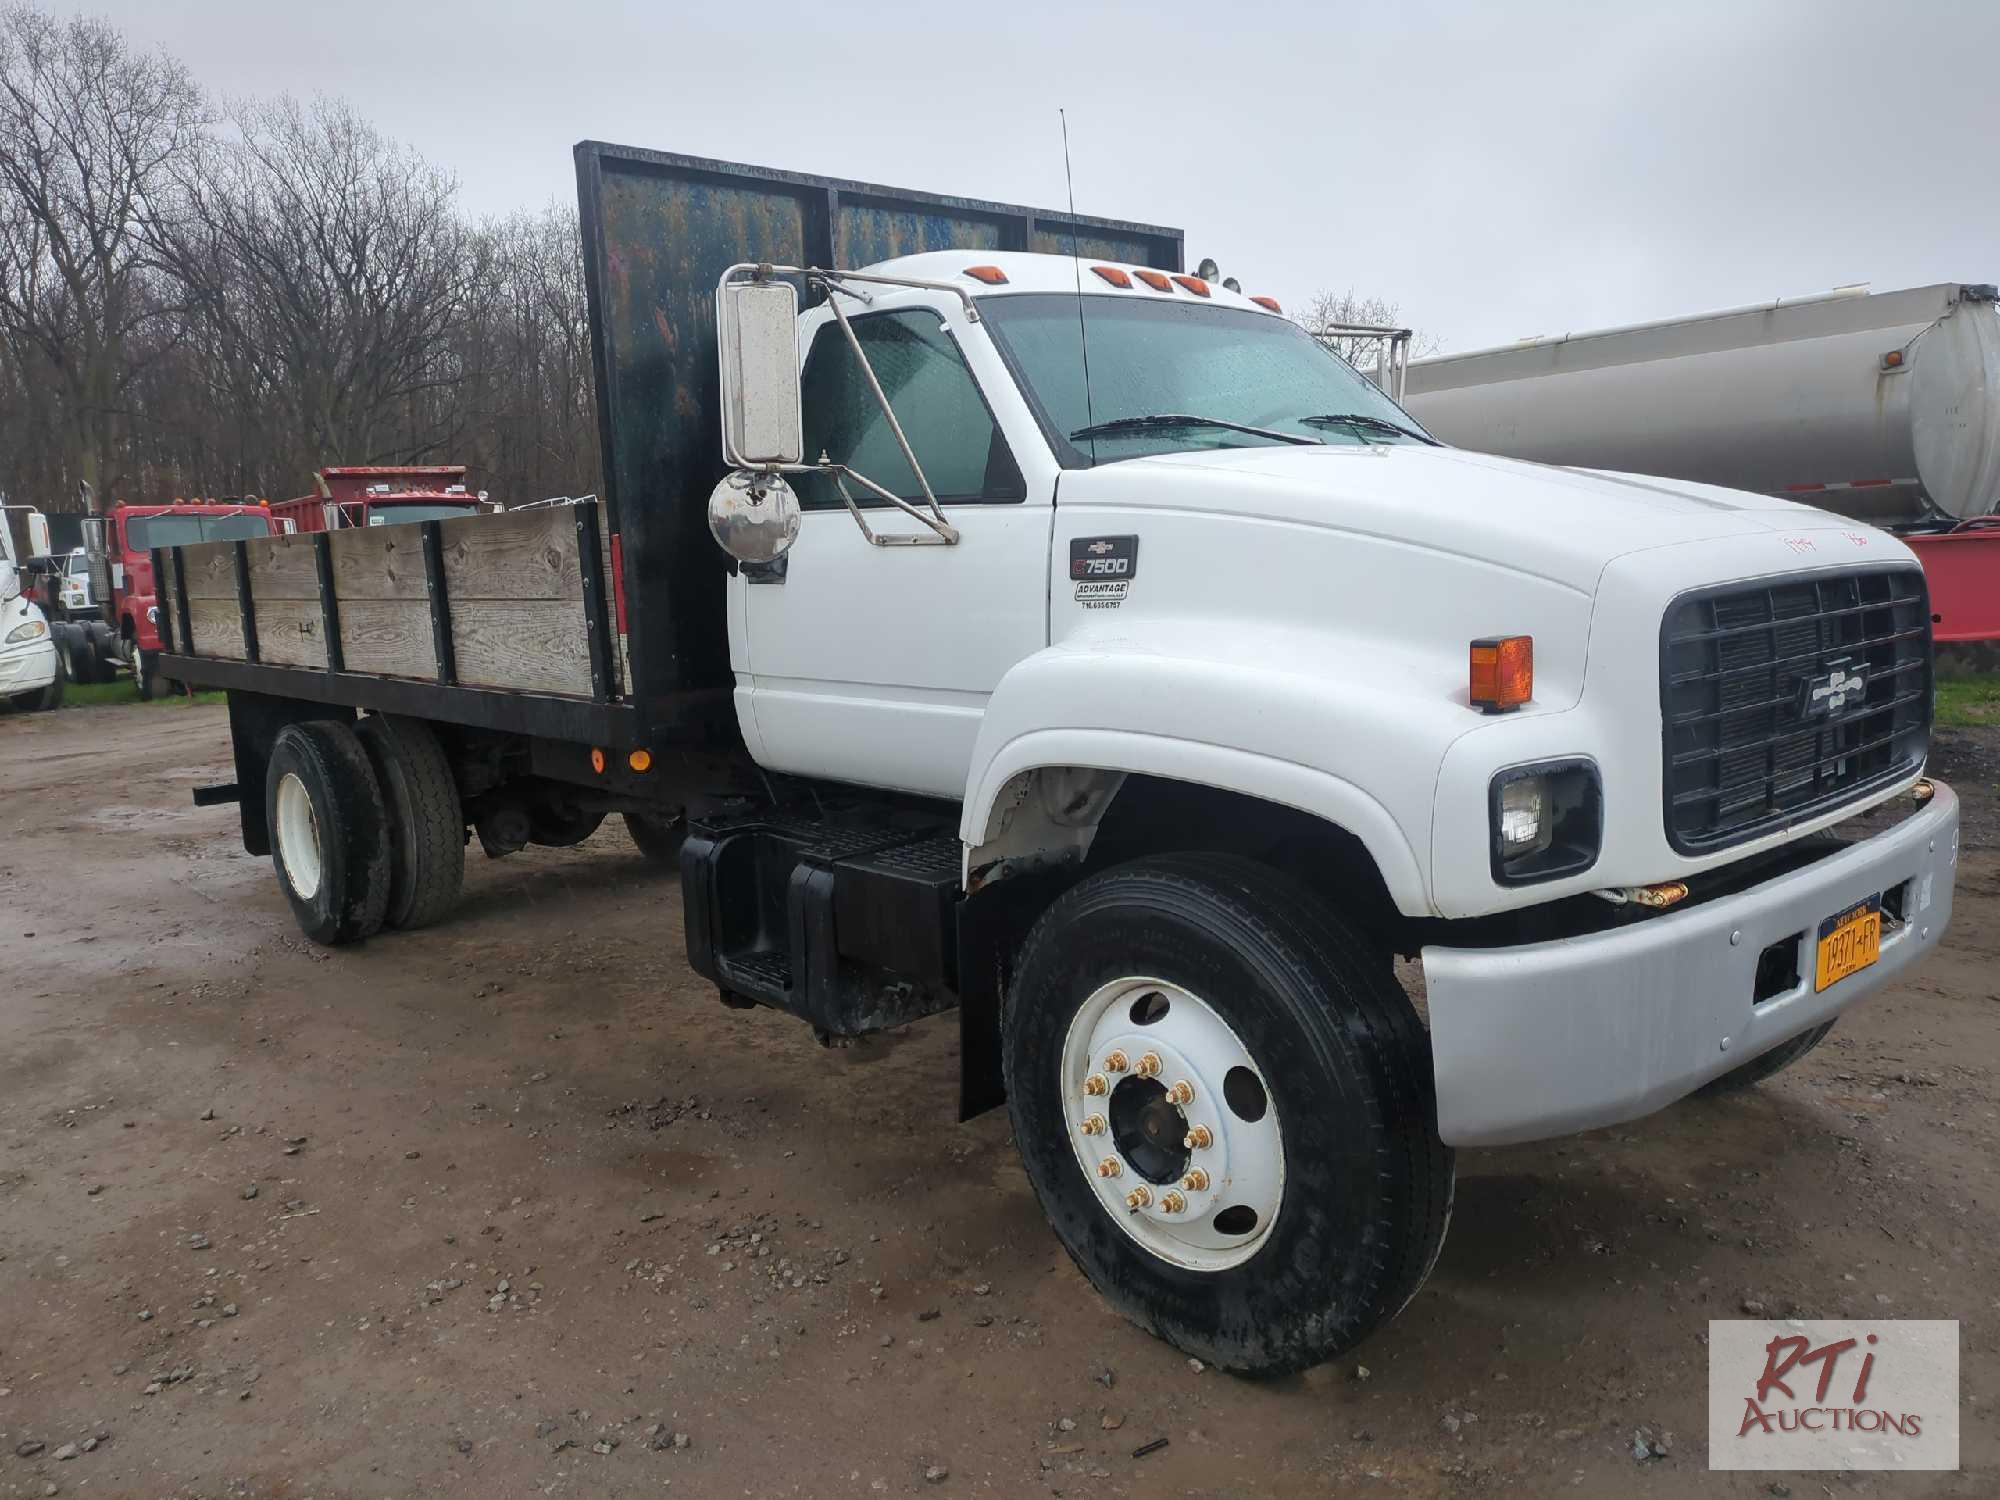 1999 Chevy C7500 16ft stake body dump, dual axles, air brakes, Chelsea PTO, 5 speed transmission,